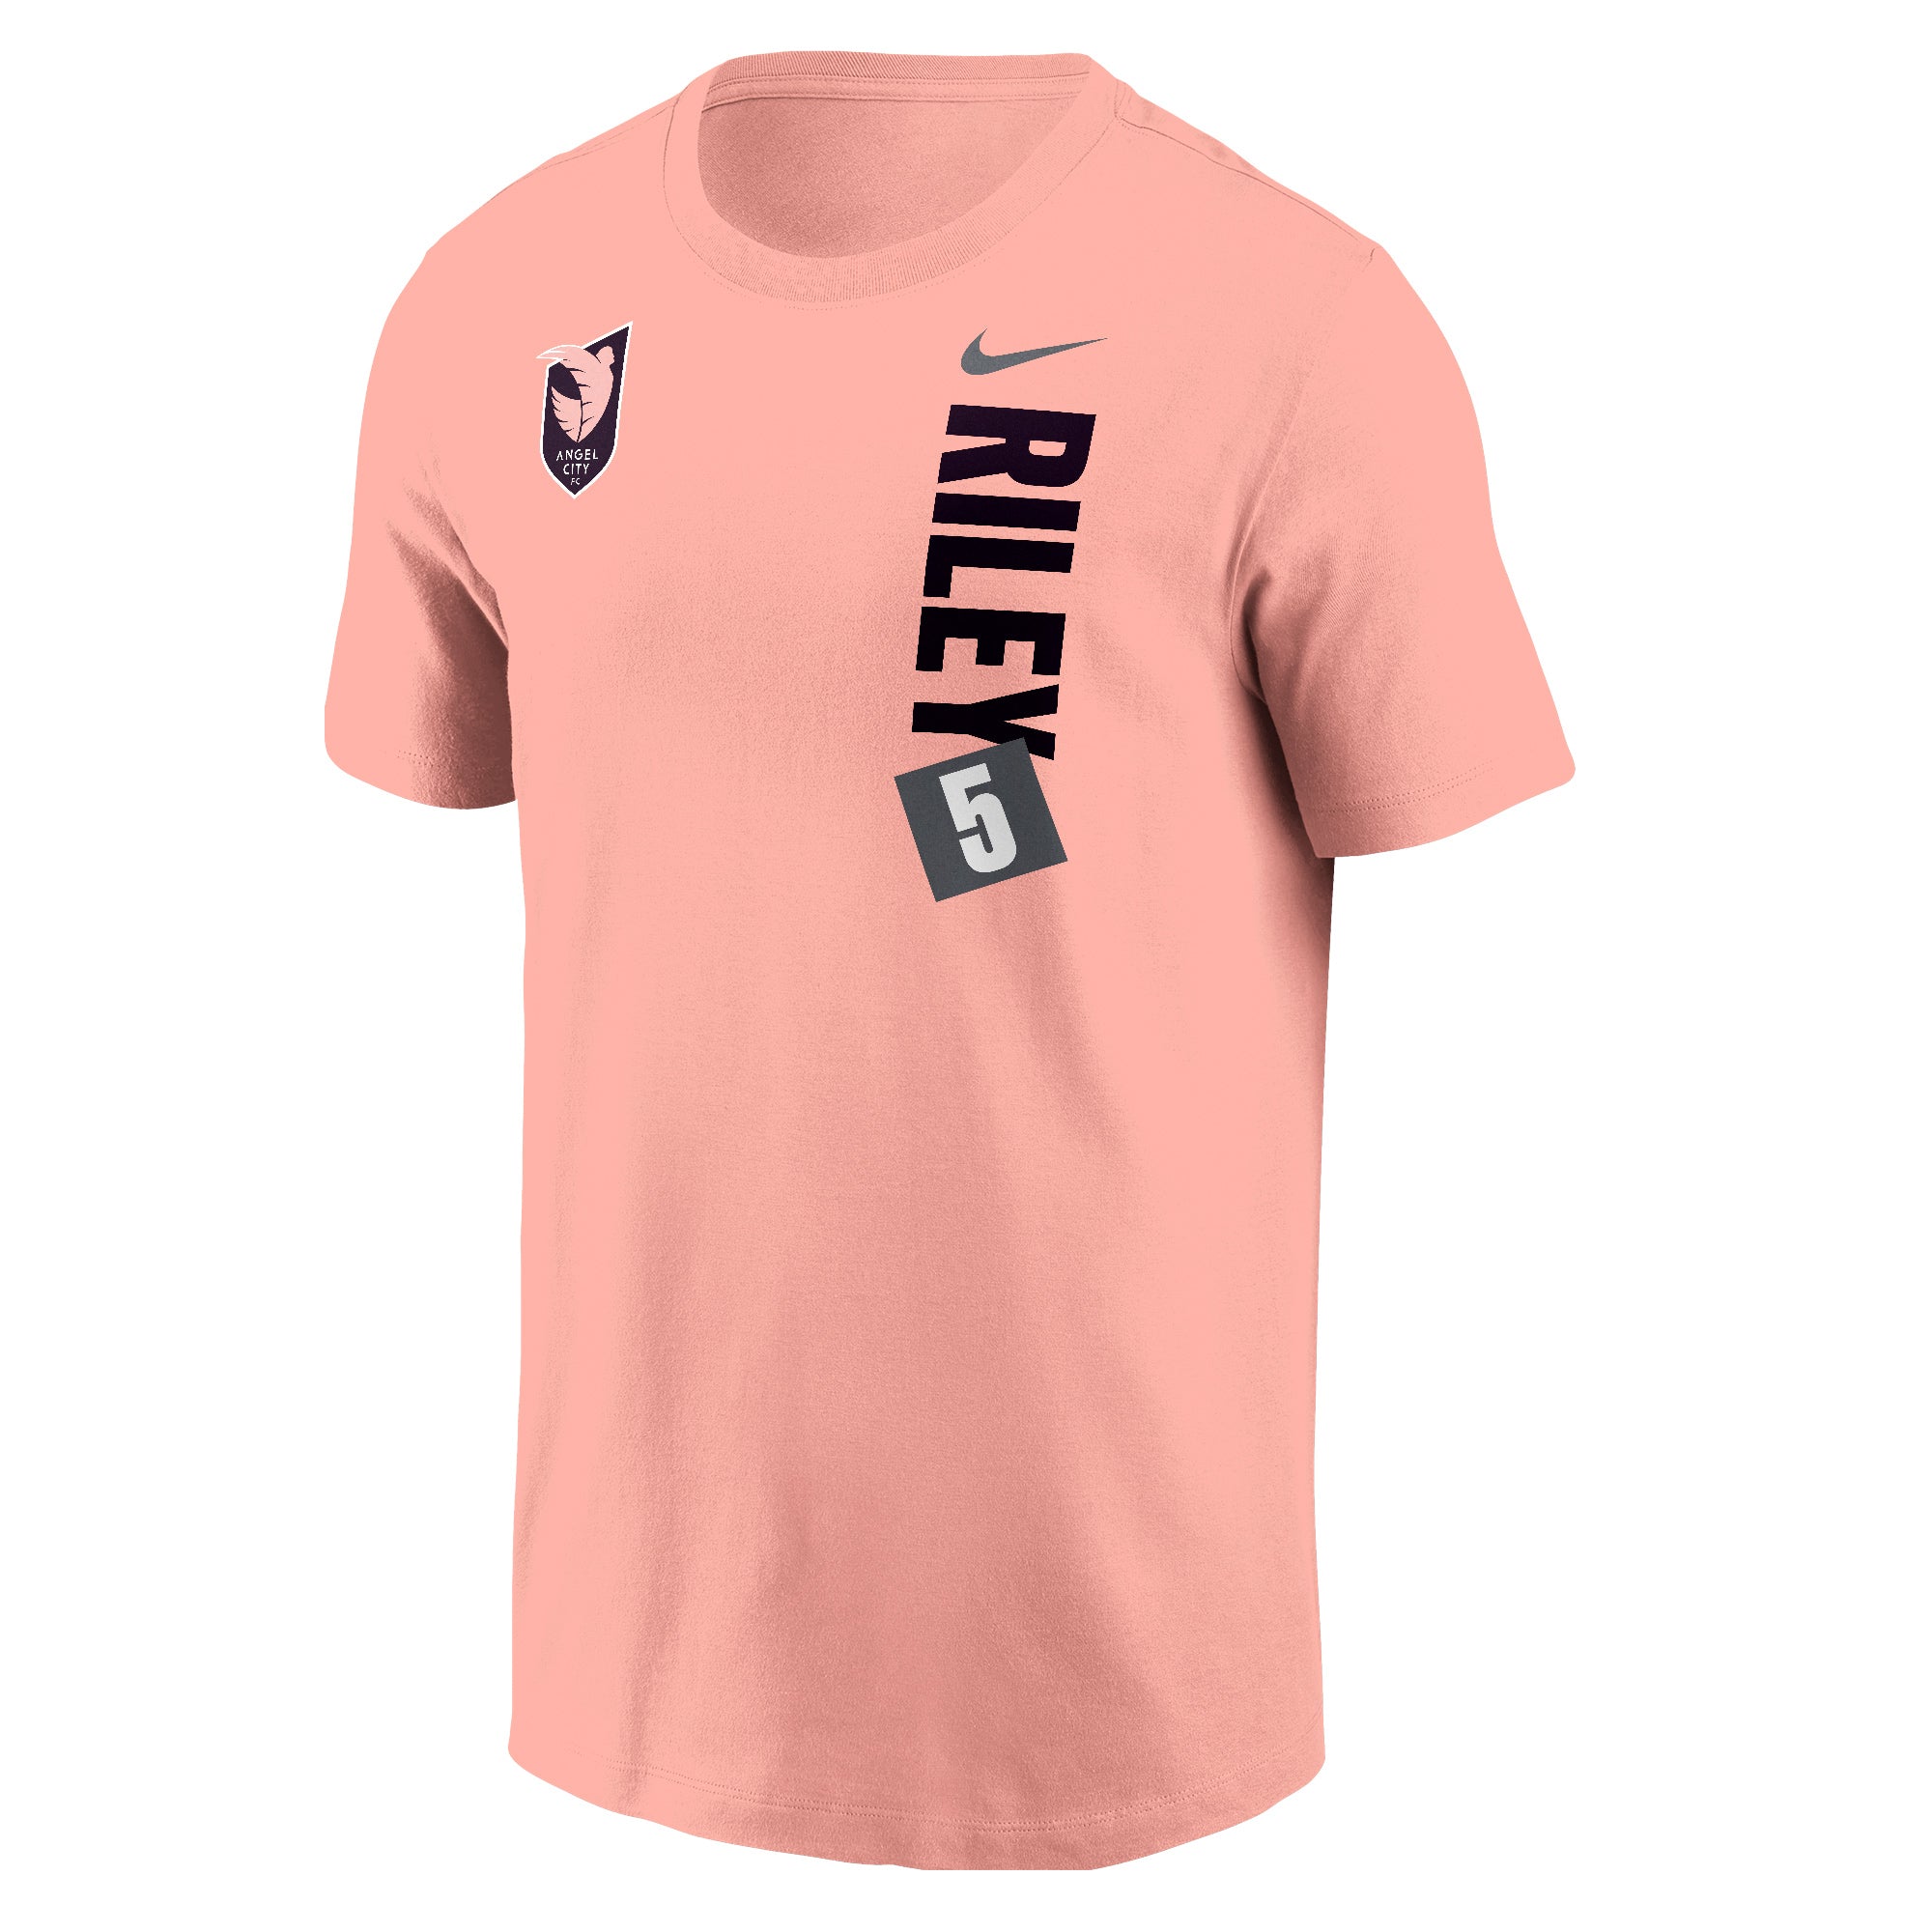 Angel City FC Nike Unisex Ali Riley Name and Number Sol Rosa Short Sleeve T-Shirt